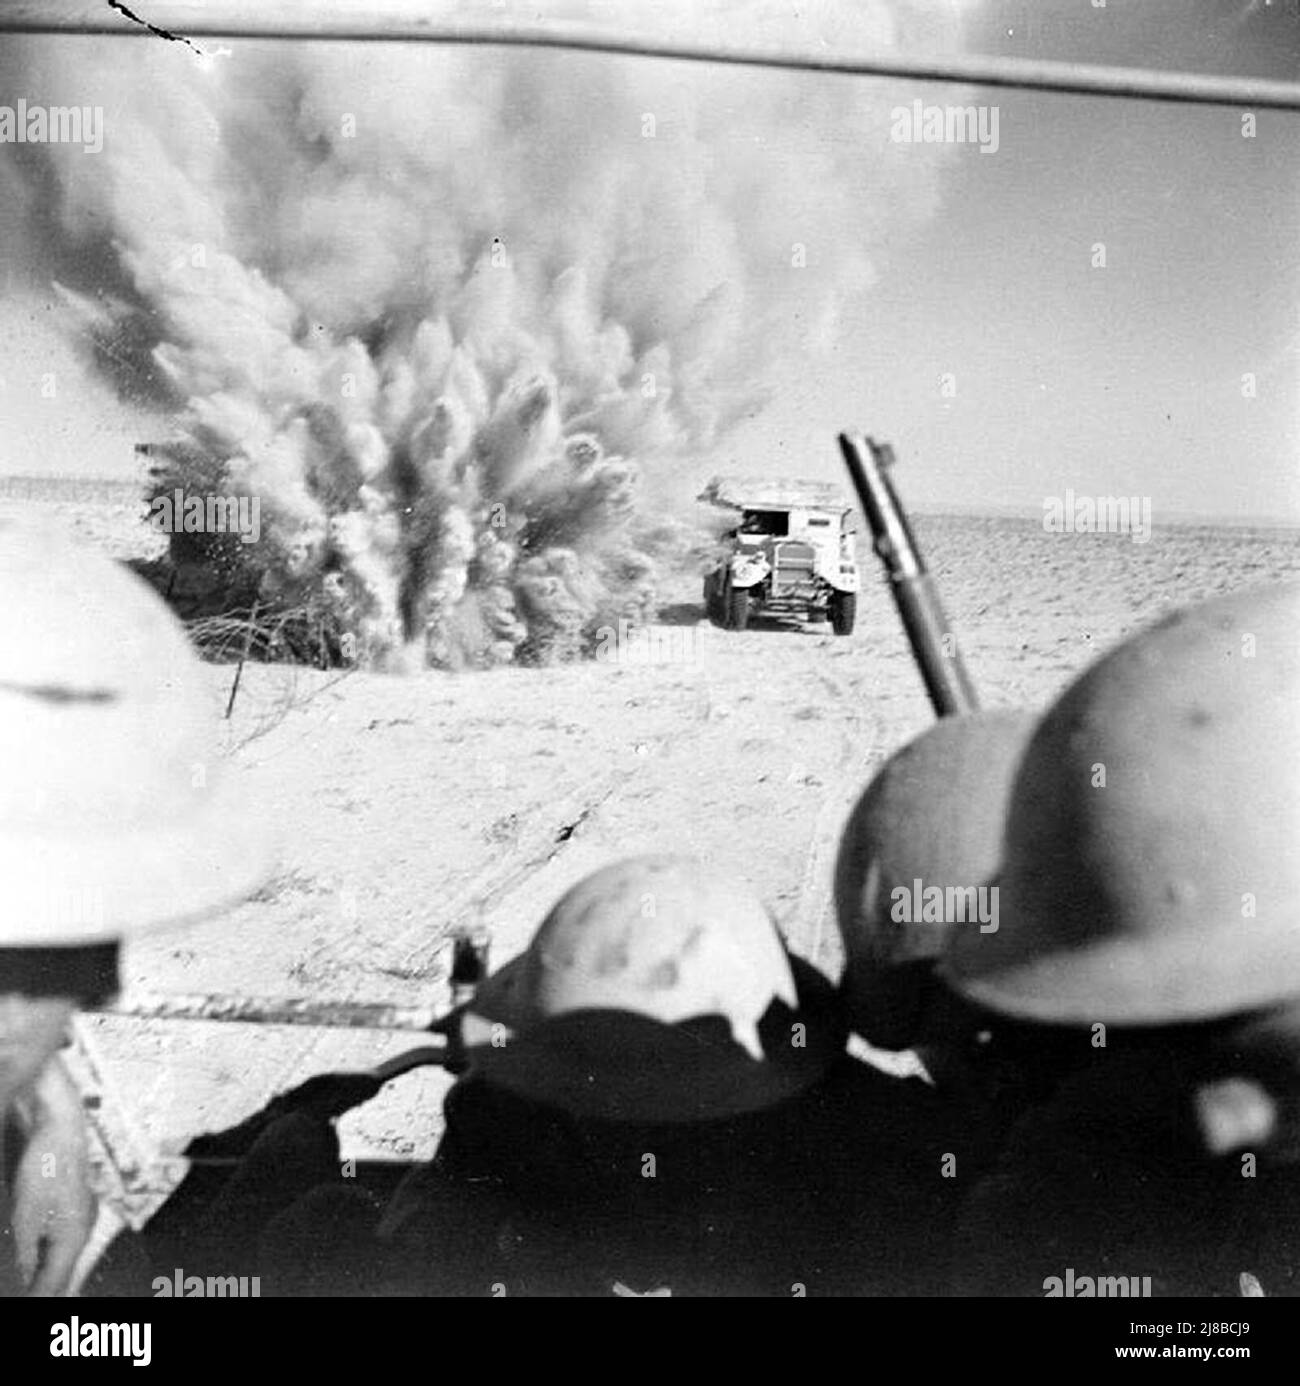 A mine explodes close to a British artillery tractor during 2nd battle of El Alamein  during the WW2 North Africa campaign Stock Photo